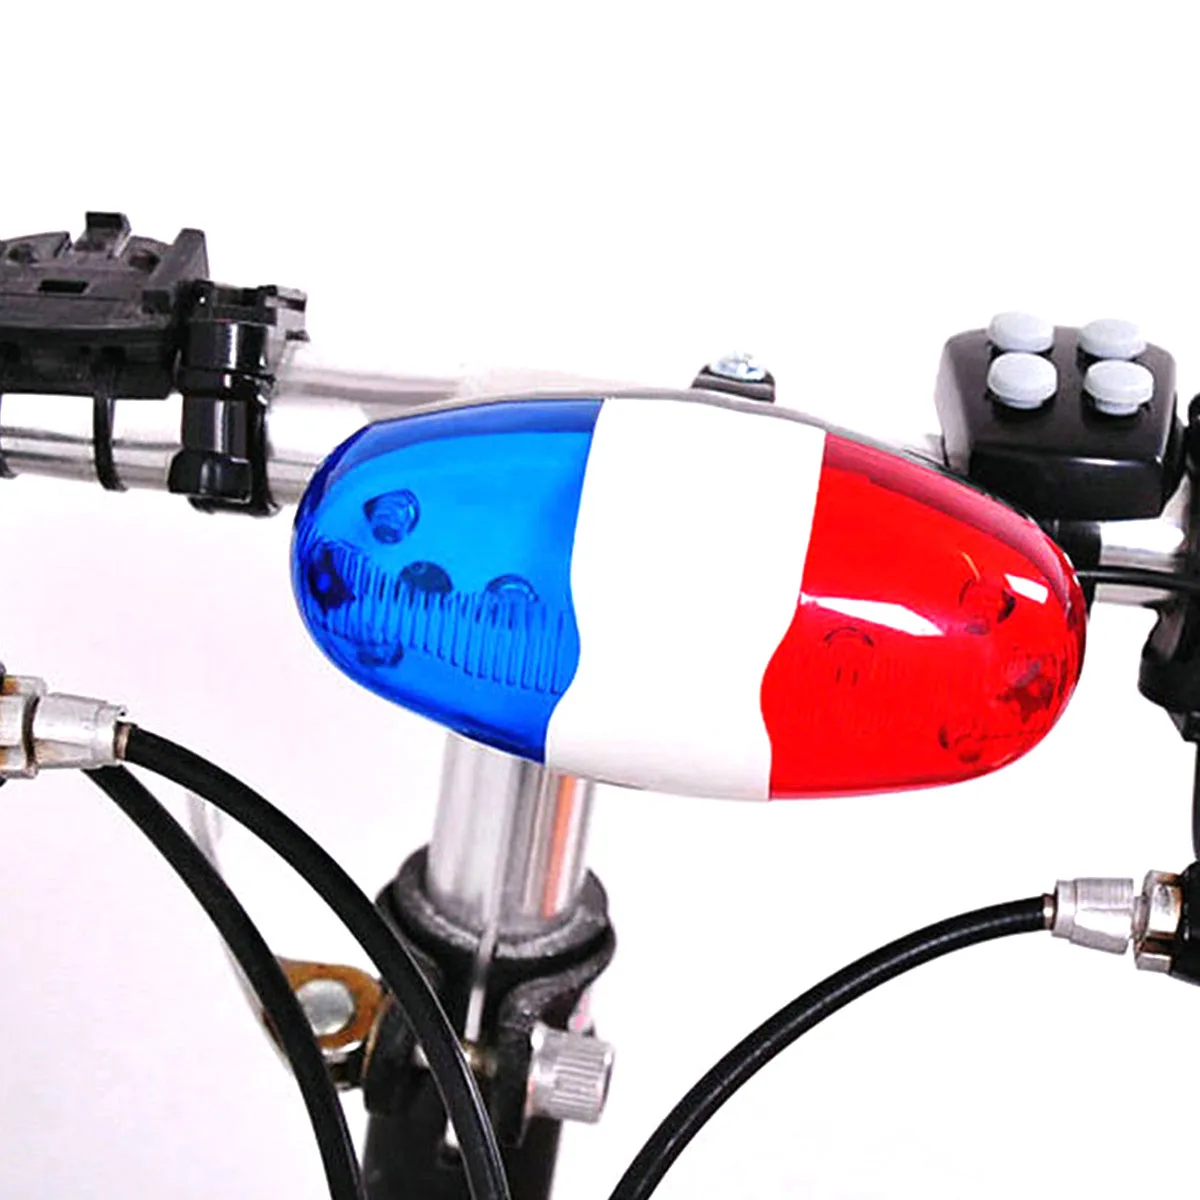 Bicycle Bell 6 LED 4 Tone Bicycle Horn Bike Call LED Bike Police Light Electronic loud Siren Kid Accessories Bike Scooter MTB